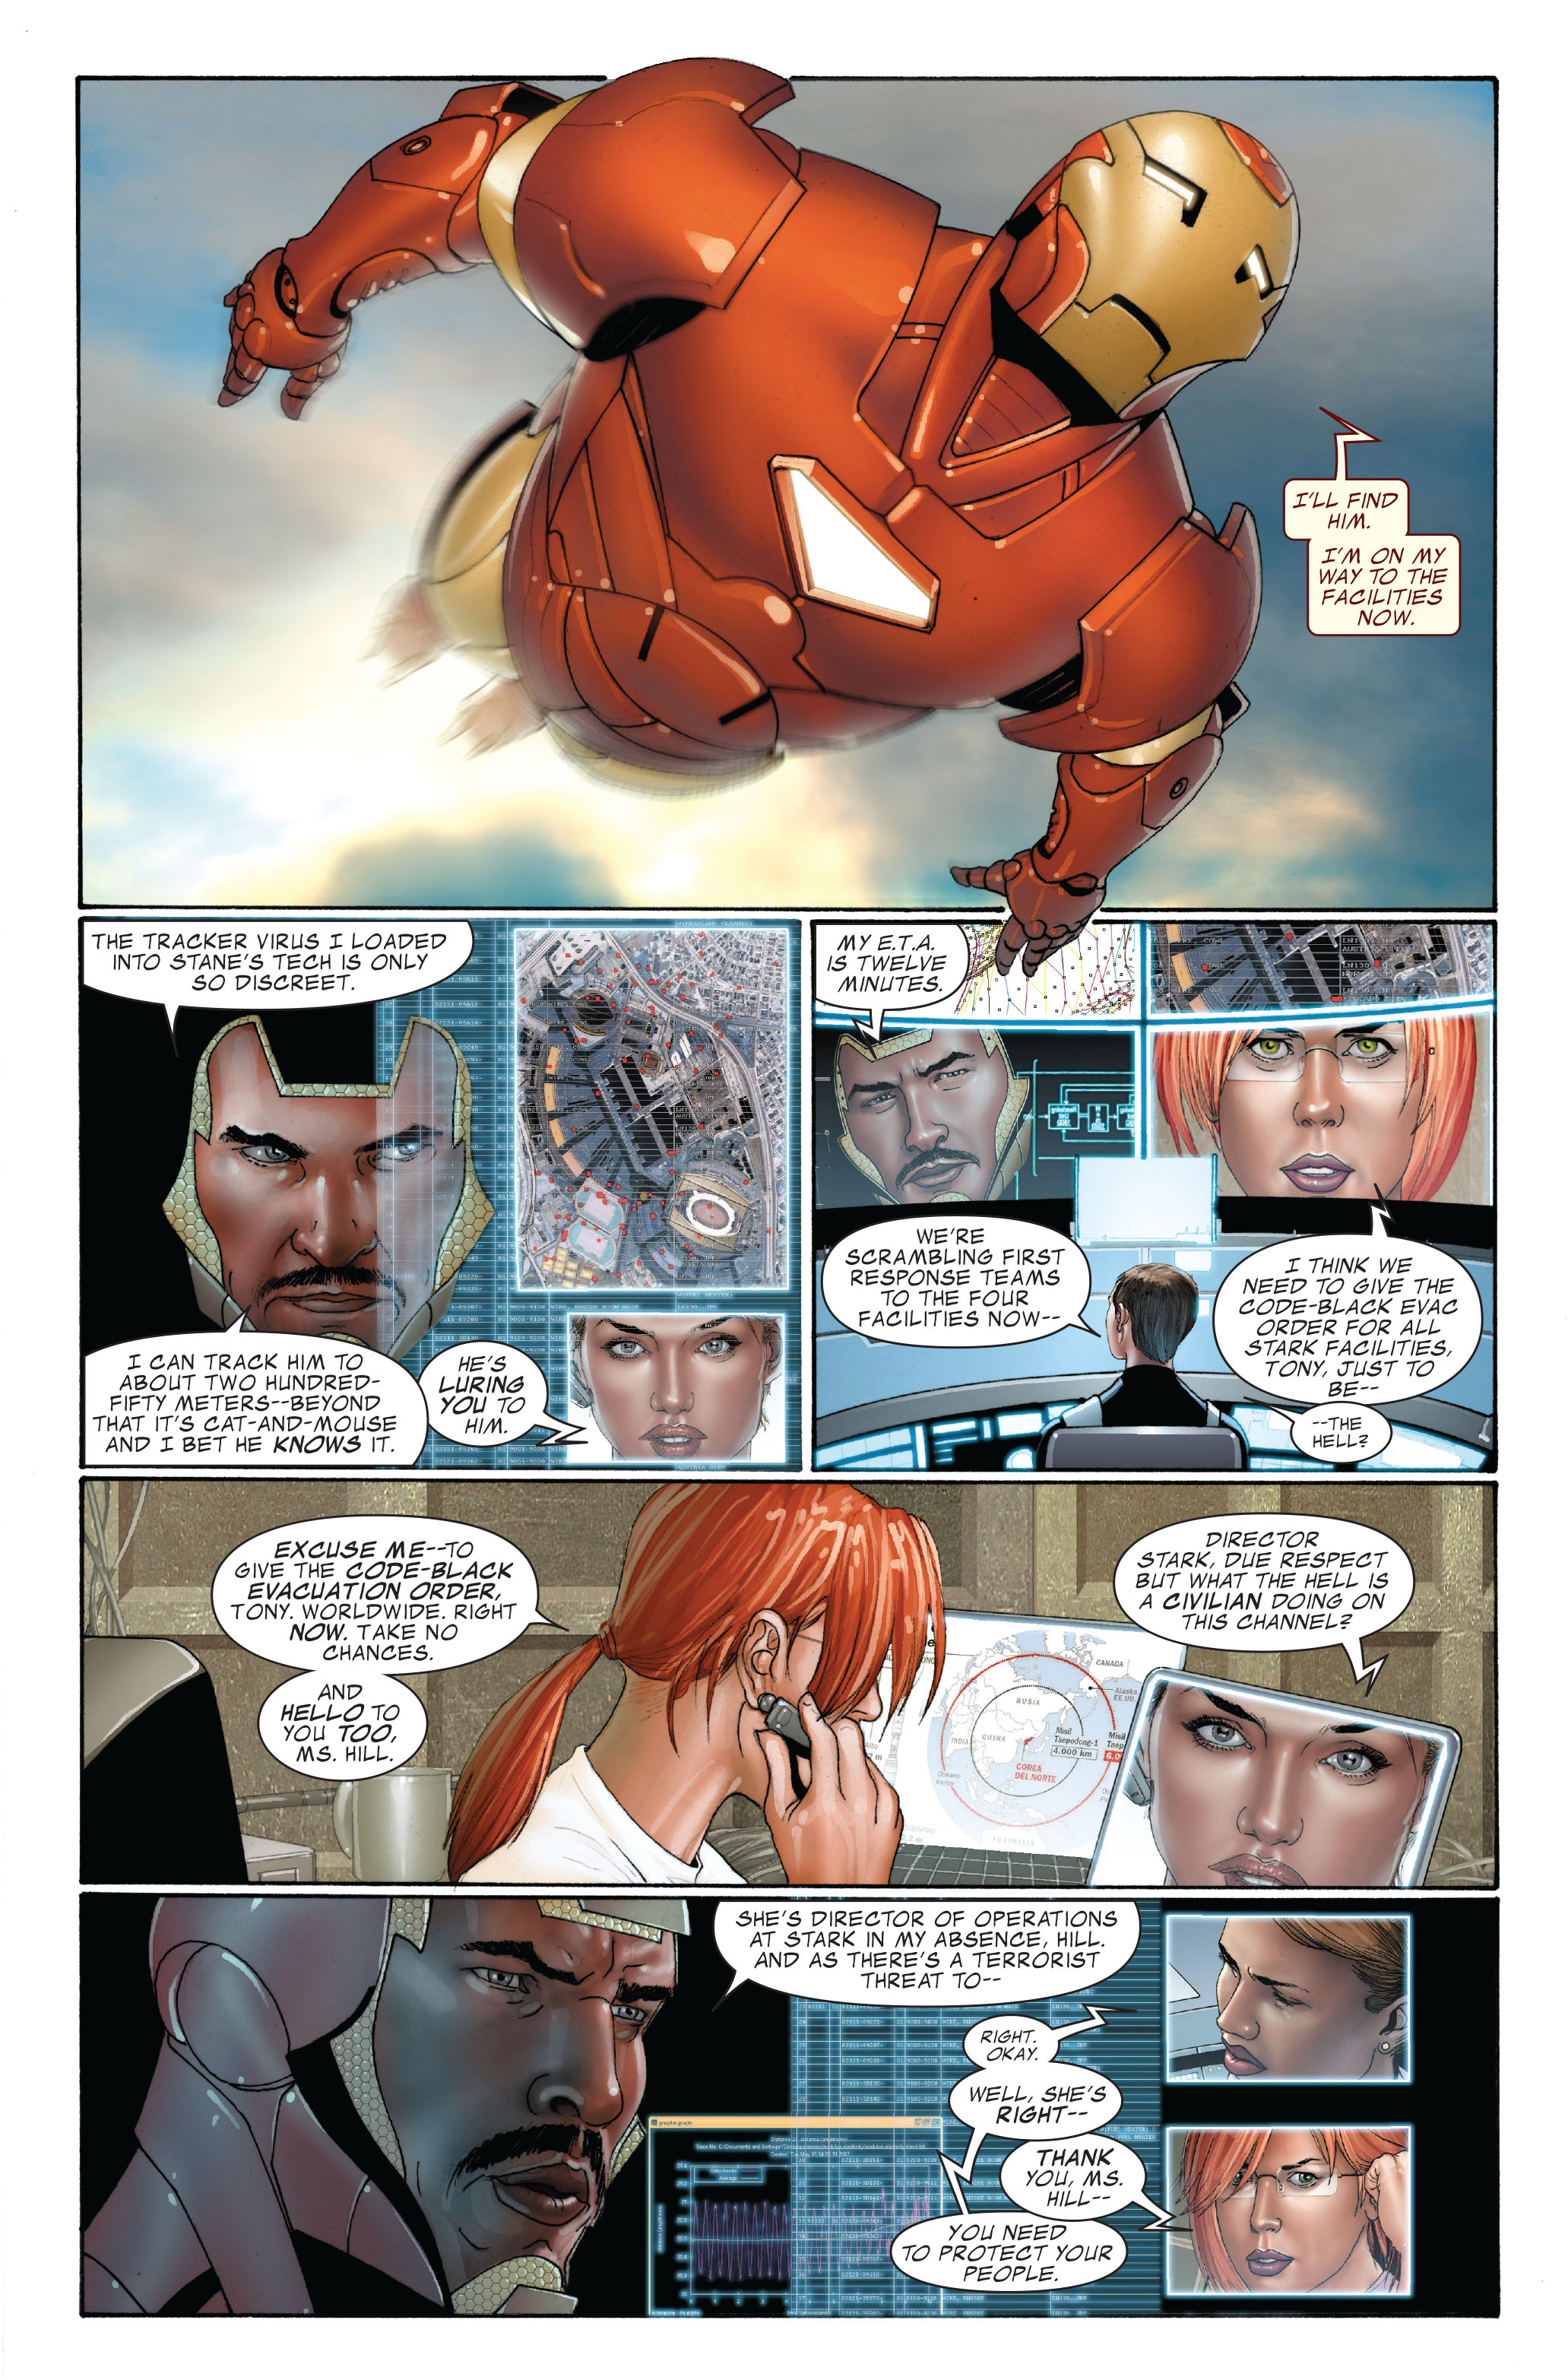 Invincible Iron Man (2008) 5 Page 5